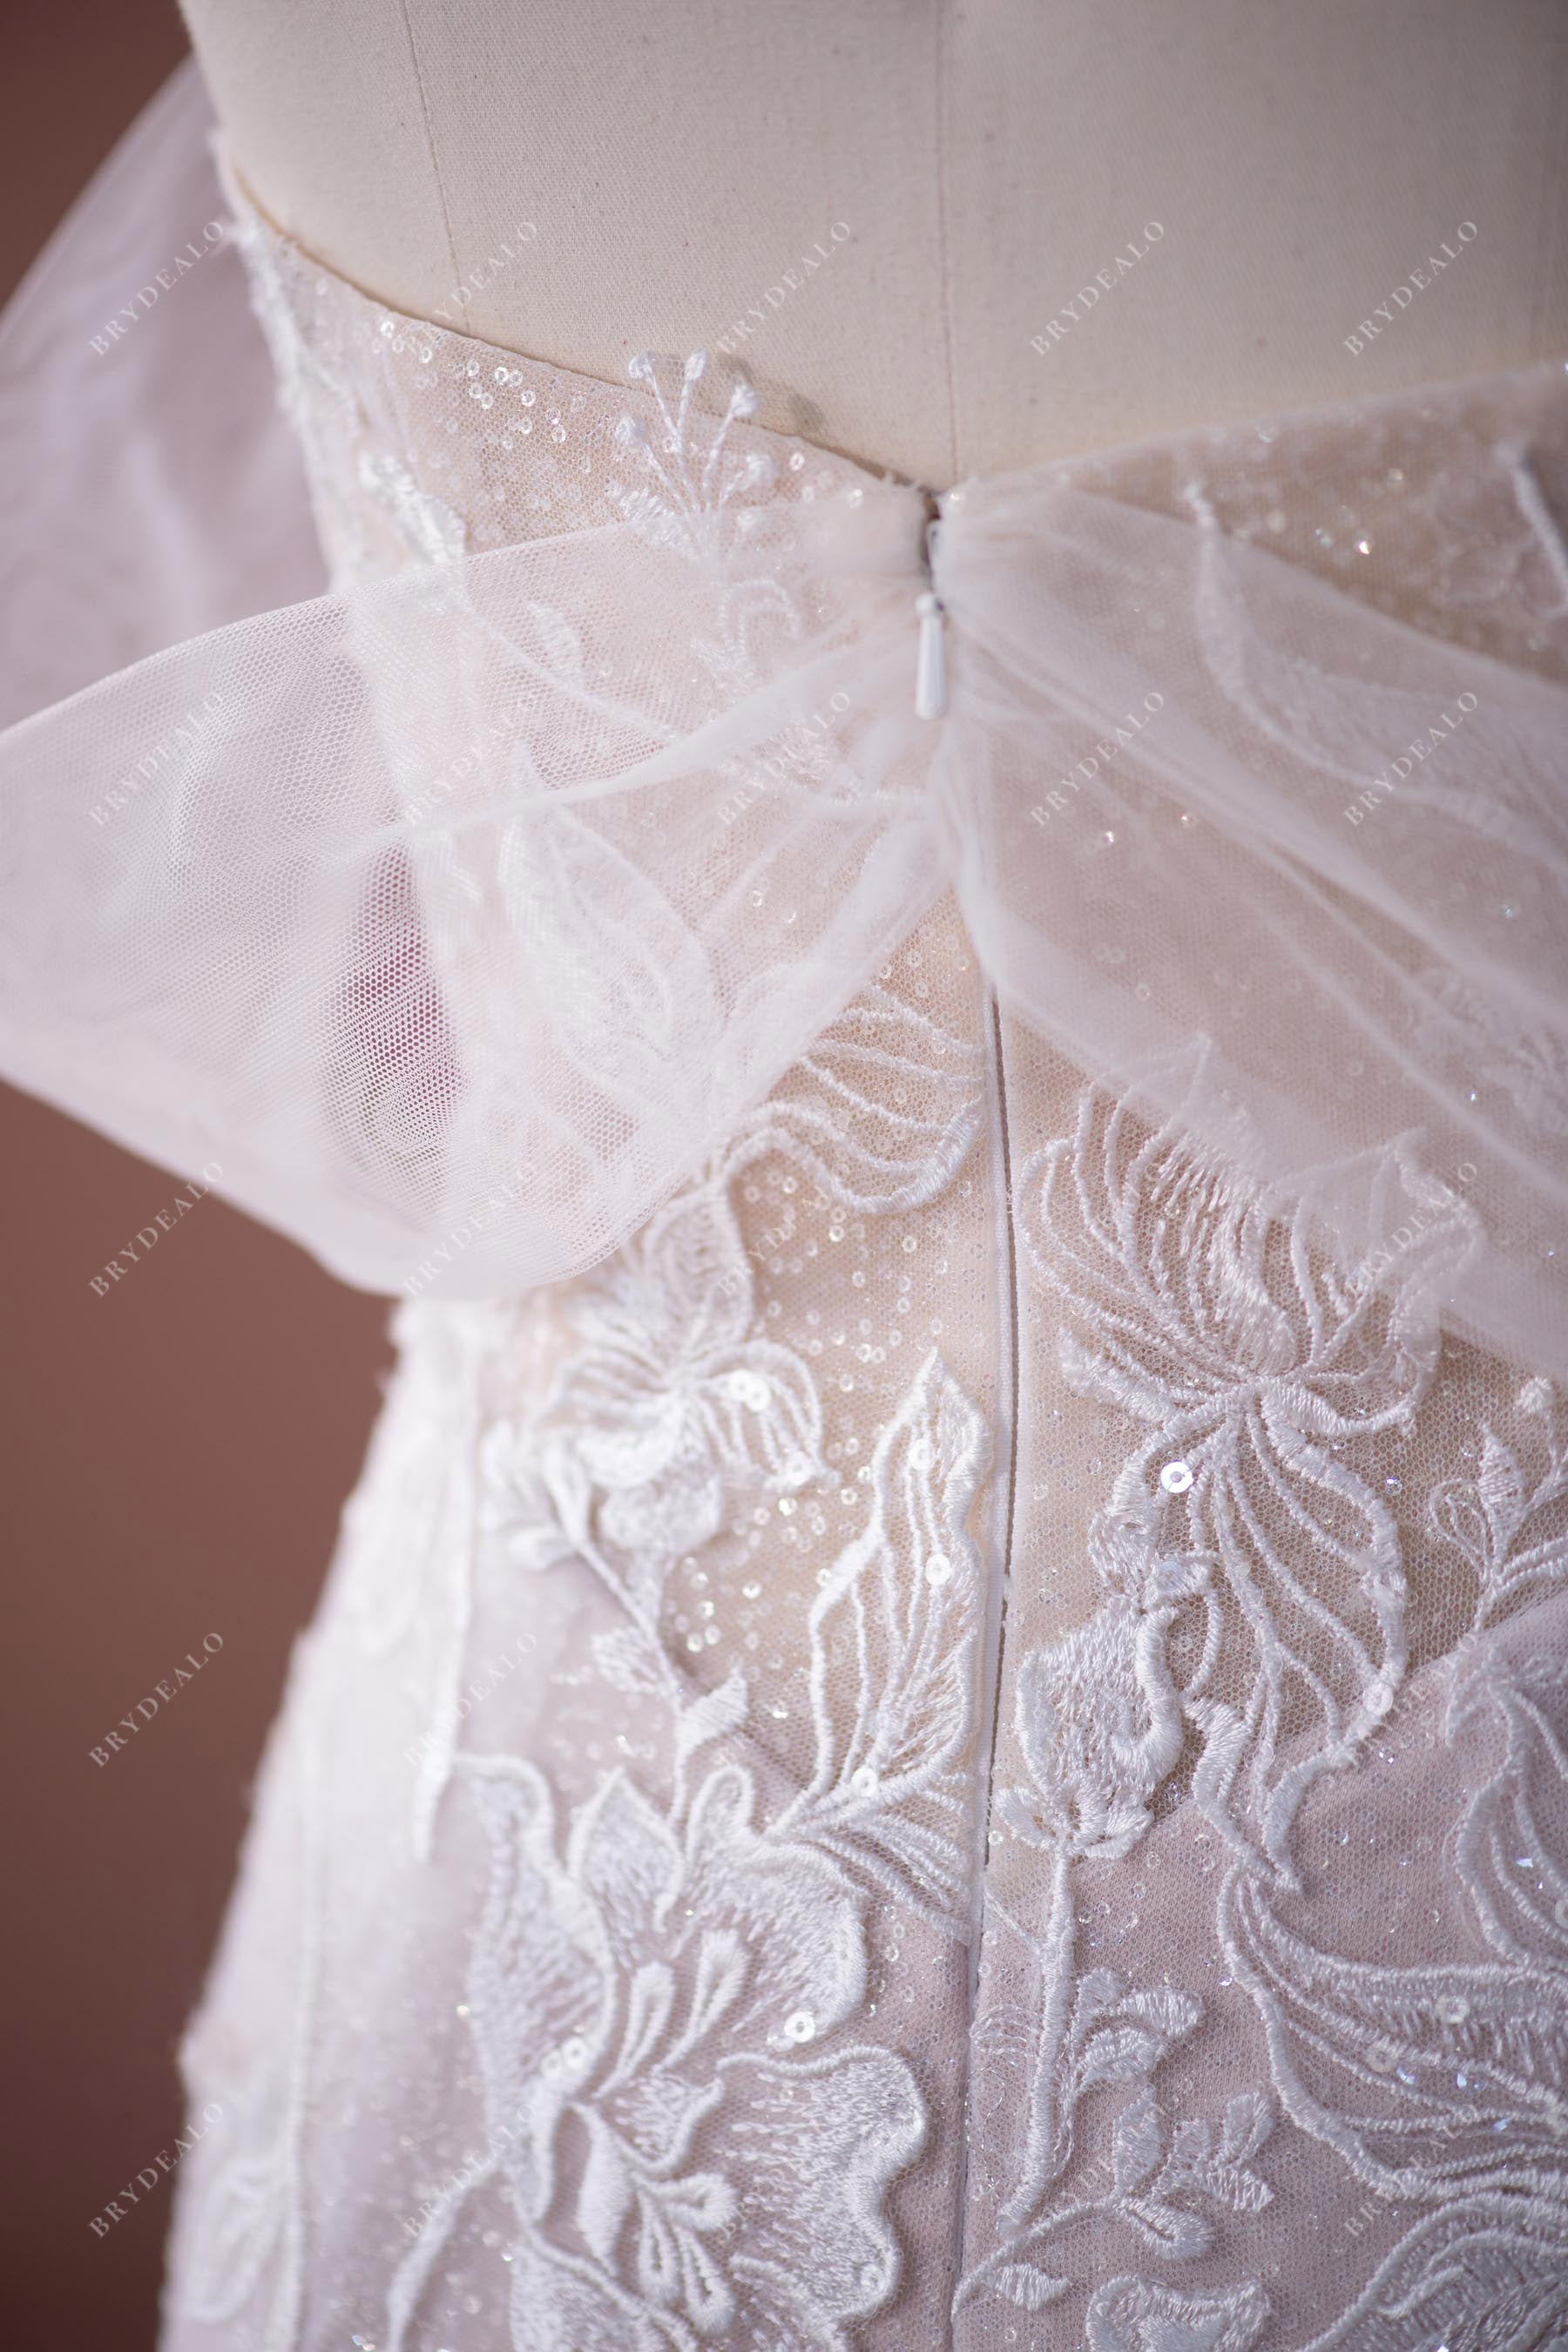 Shimmery Lace Tulle Amazing Wedding Gown